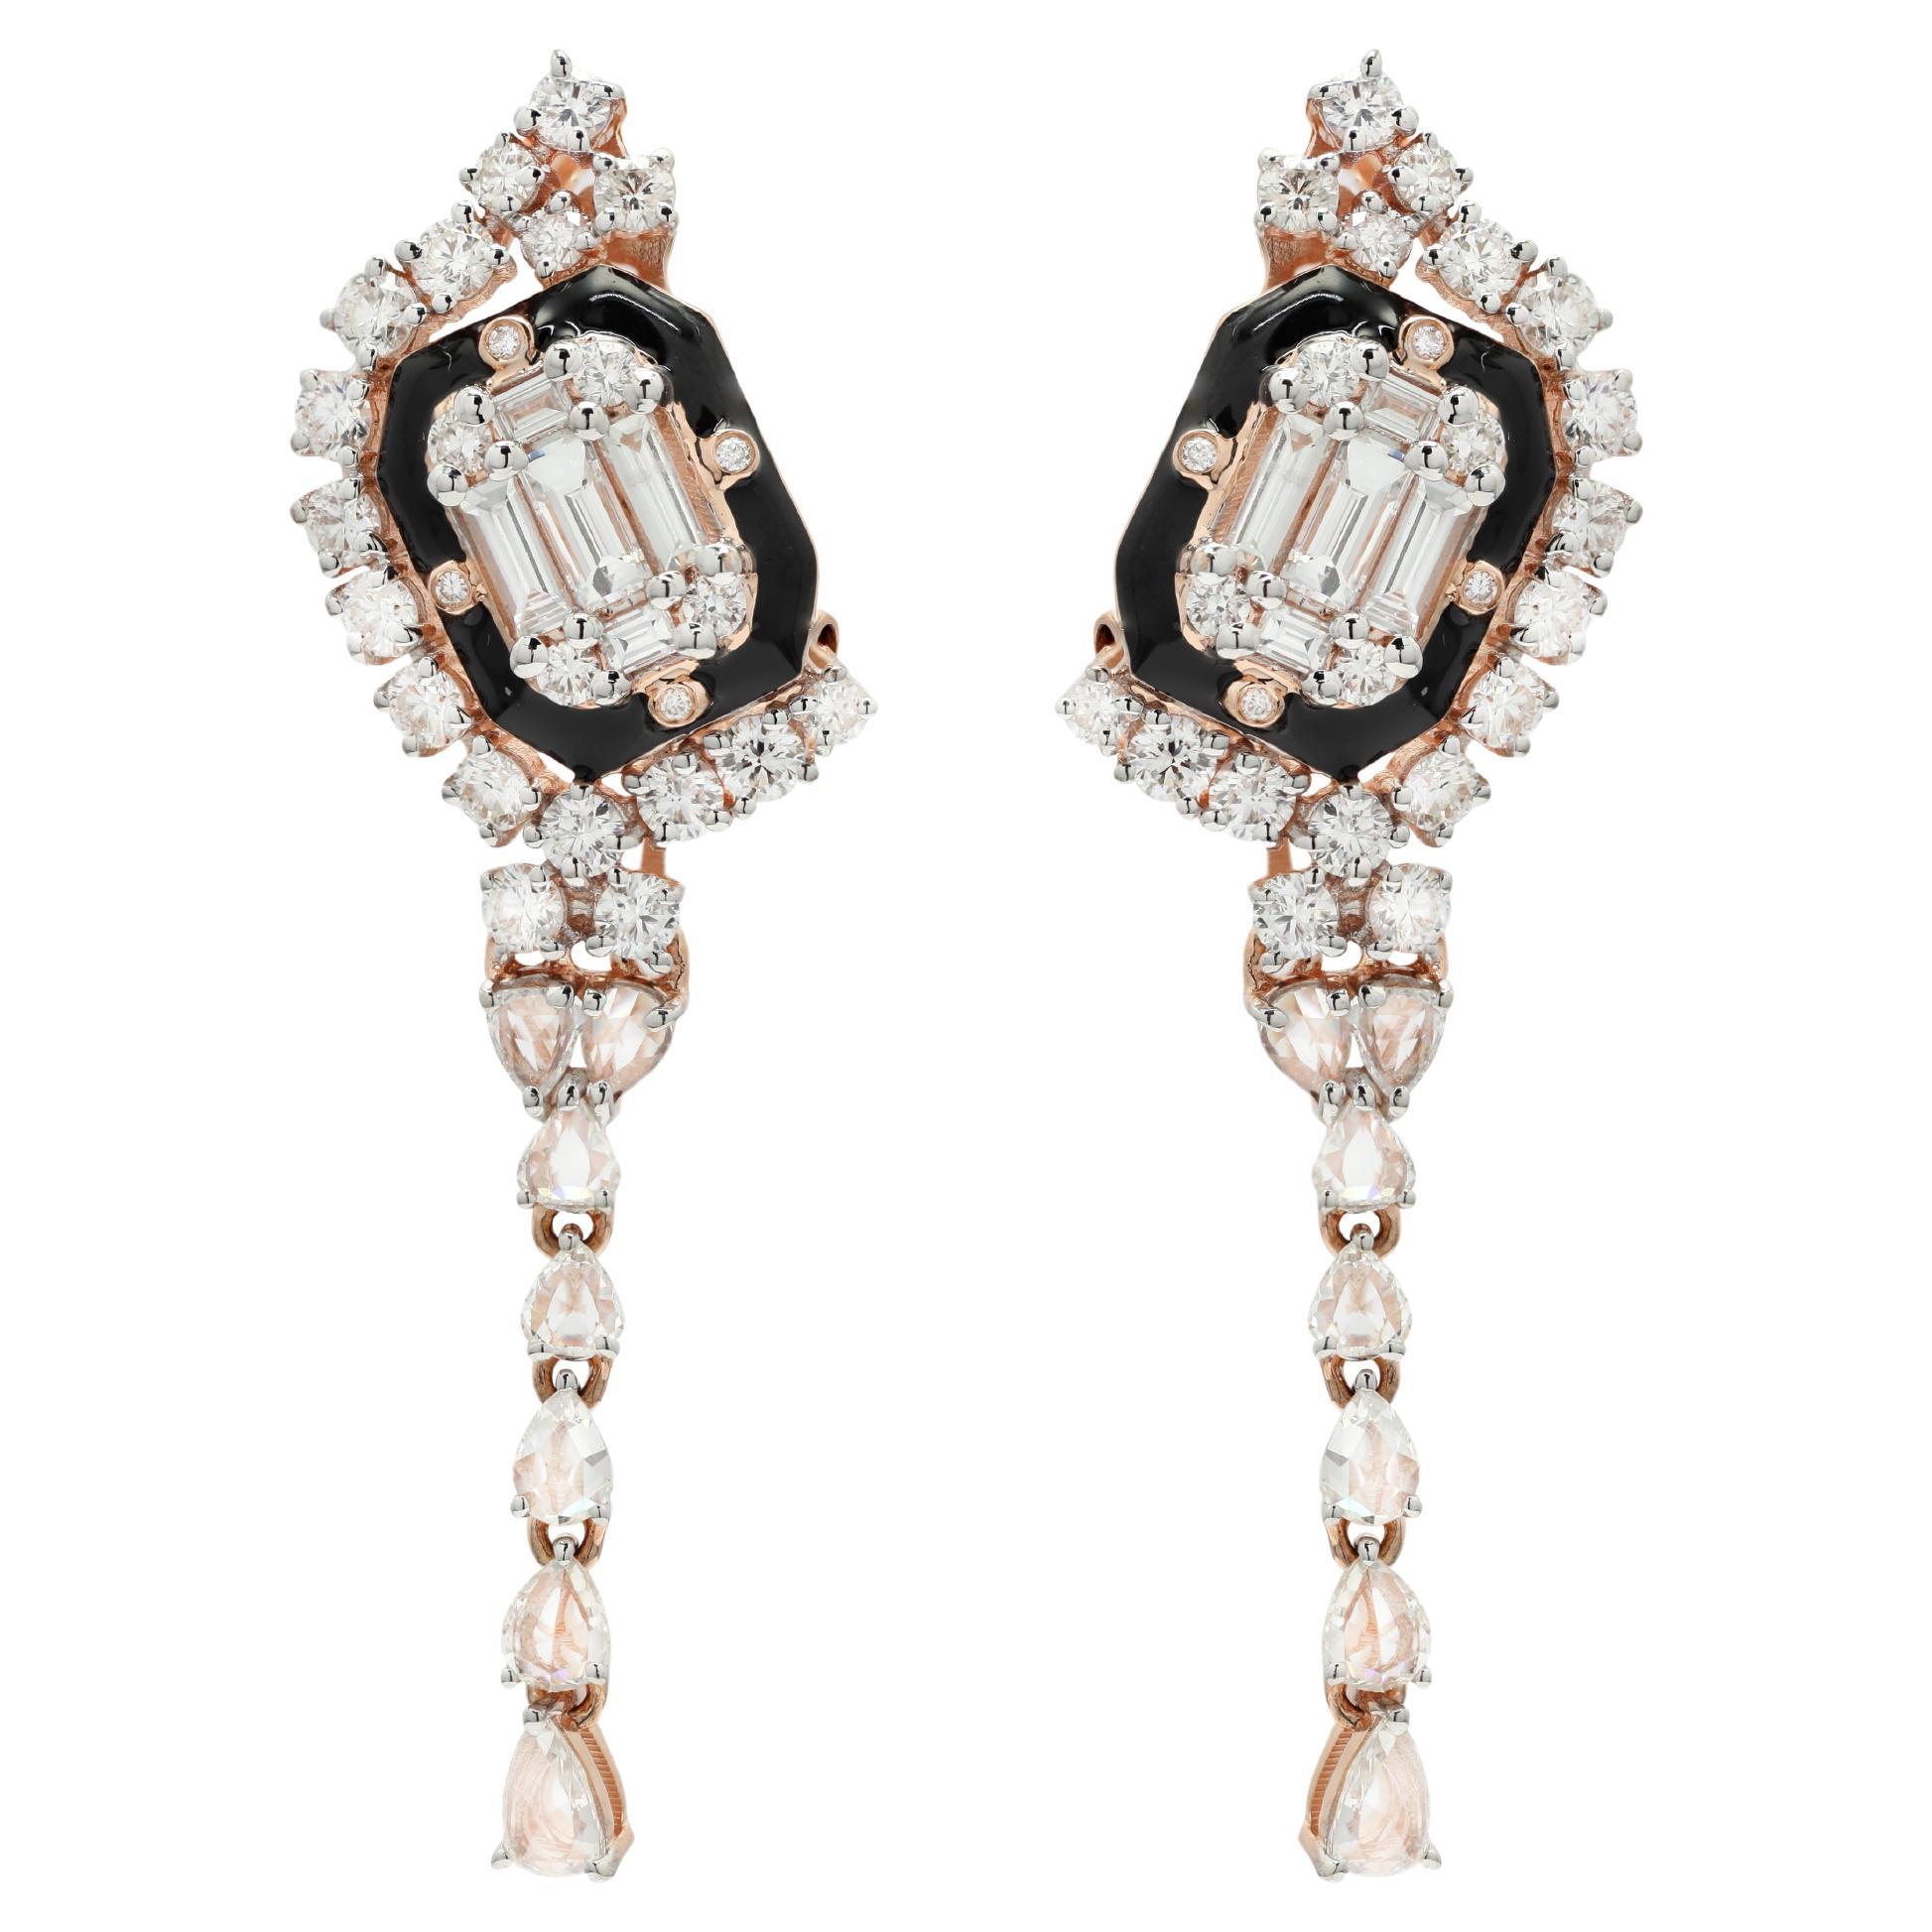 2.11 cts Diamond and Enamel Cocktail Earrings in 14k Solid Rose Gold